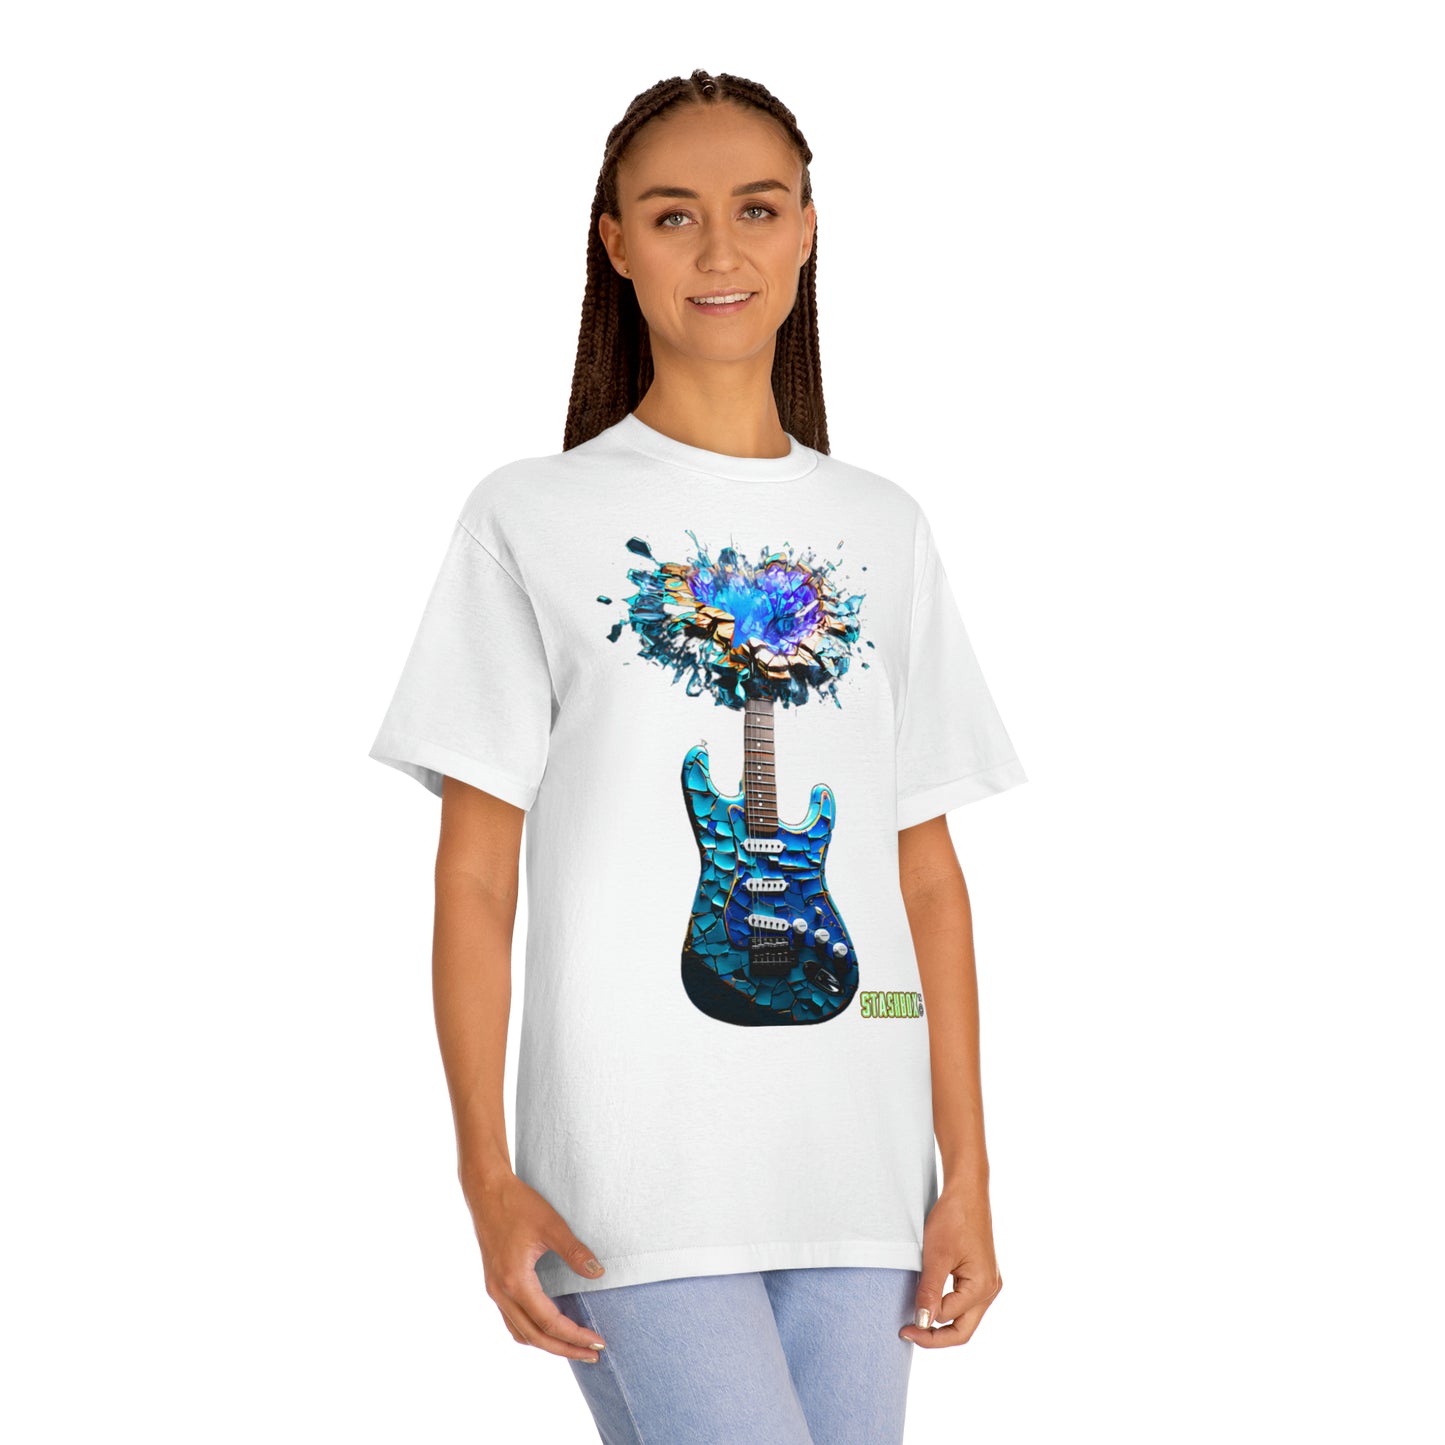 Unisex Classic Tshirt - Turquoise Electric Guitar - Scaled Tiles with color explosion 002